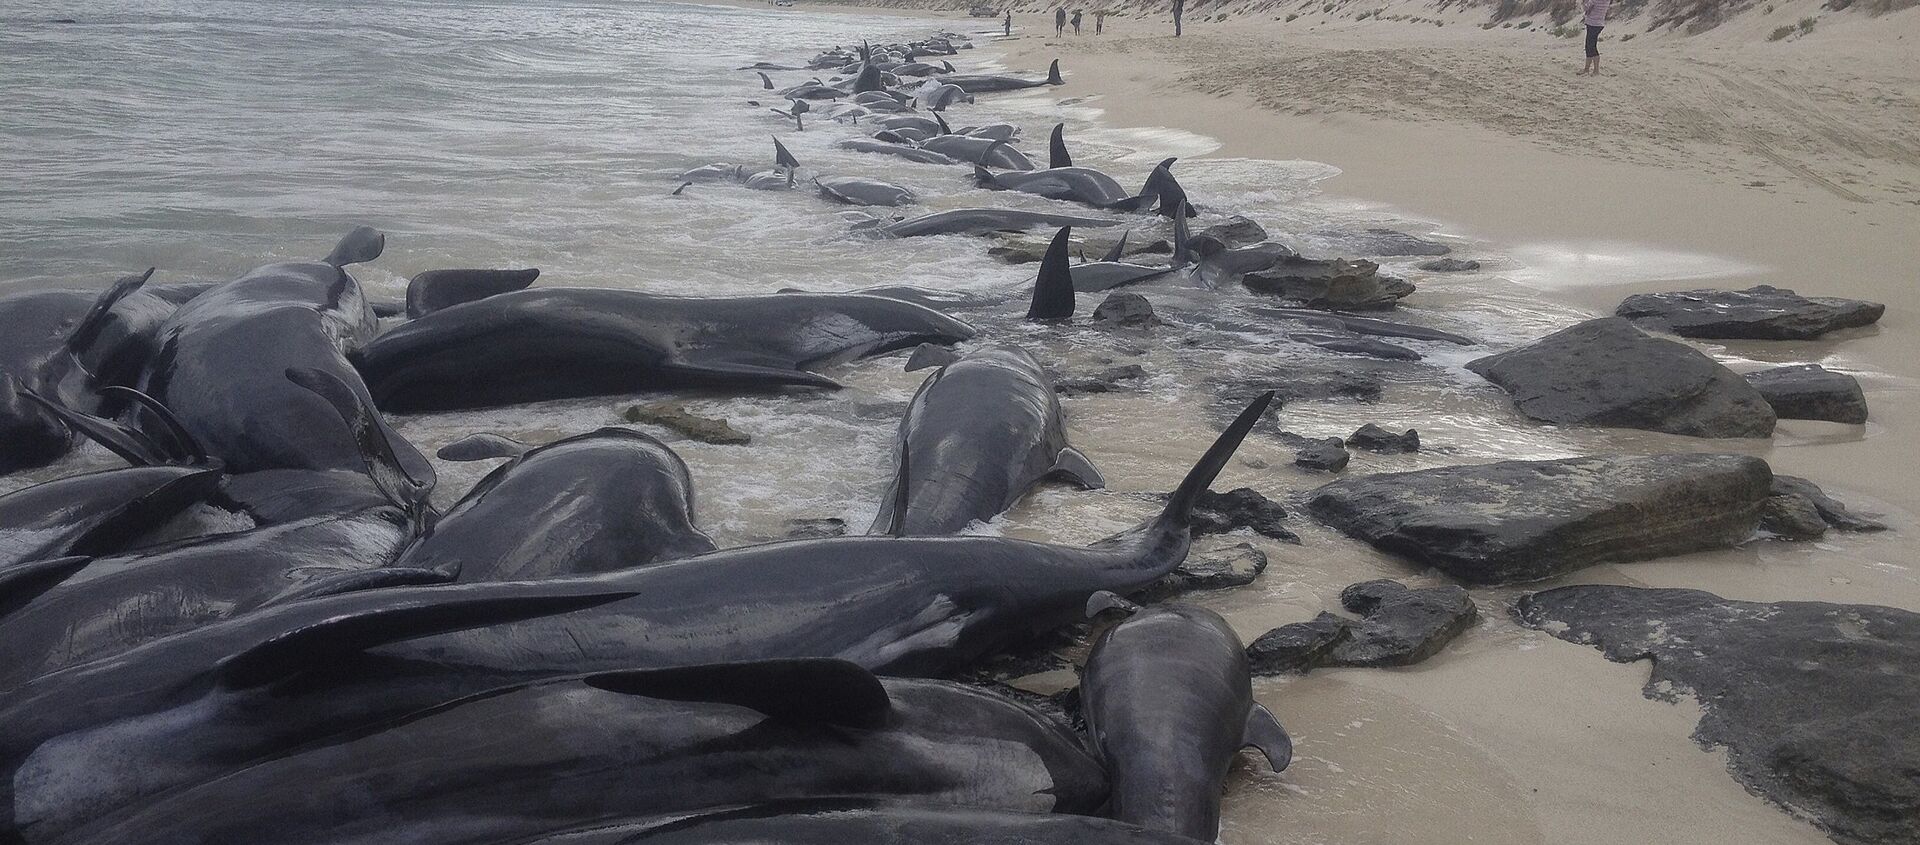 Supplied image of more than 150 short-finned pilot whales who became beached at Hamelin Bay, in Western Australia's south - 俄羅斯衛星通訊社, 1920, 20.08.2021